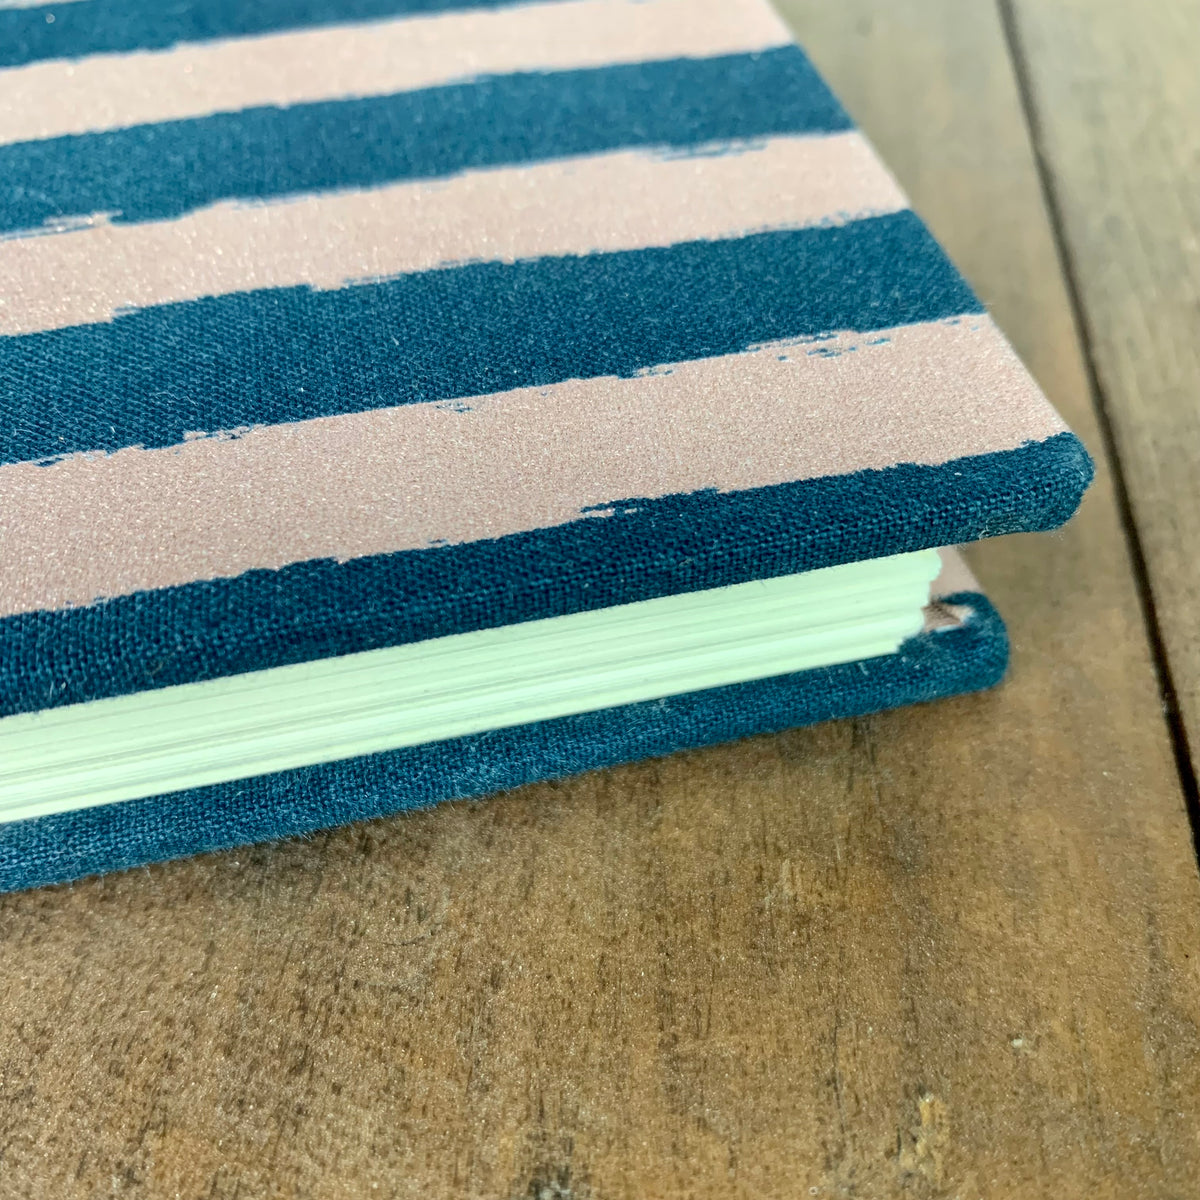 Fabric Covered Journal | Pink &amp; Blue Stripes